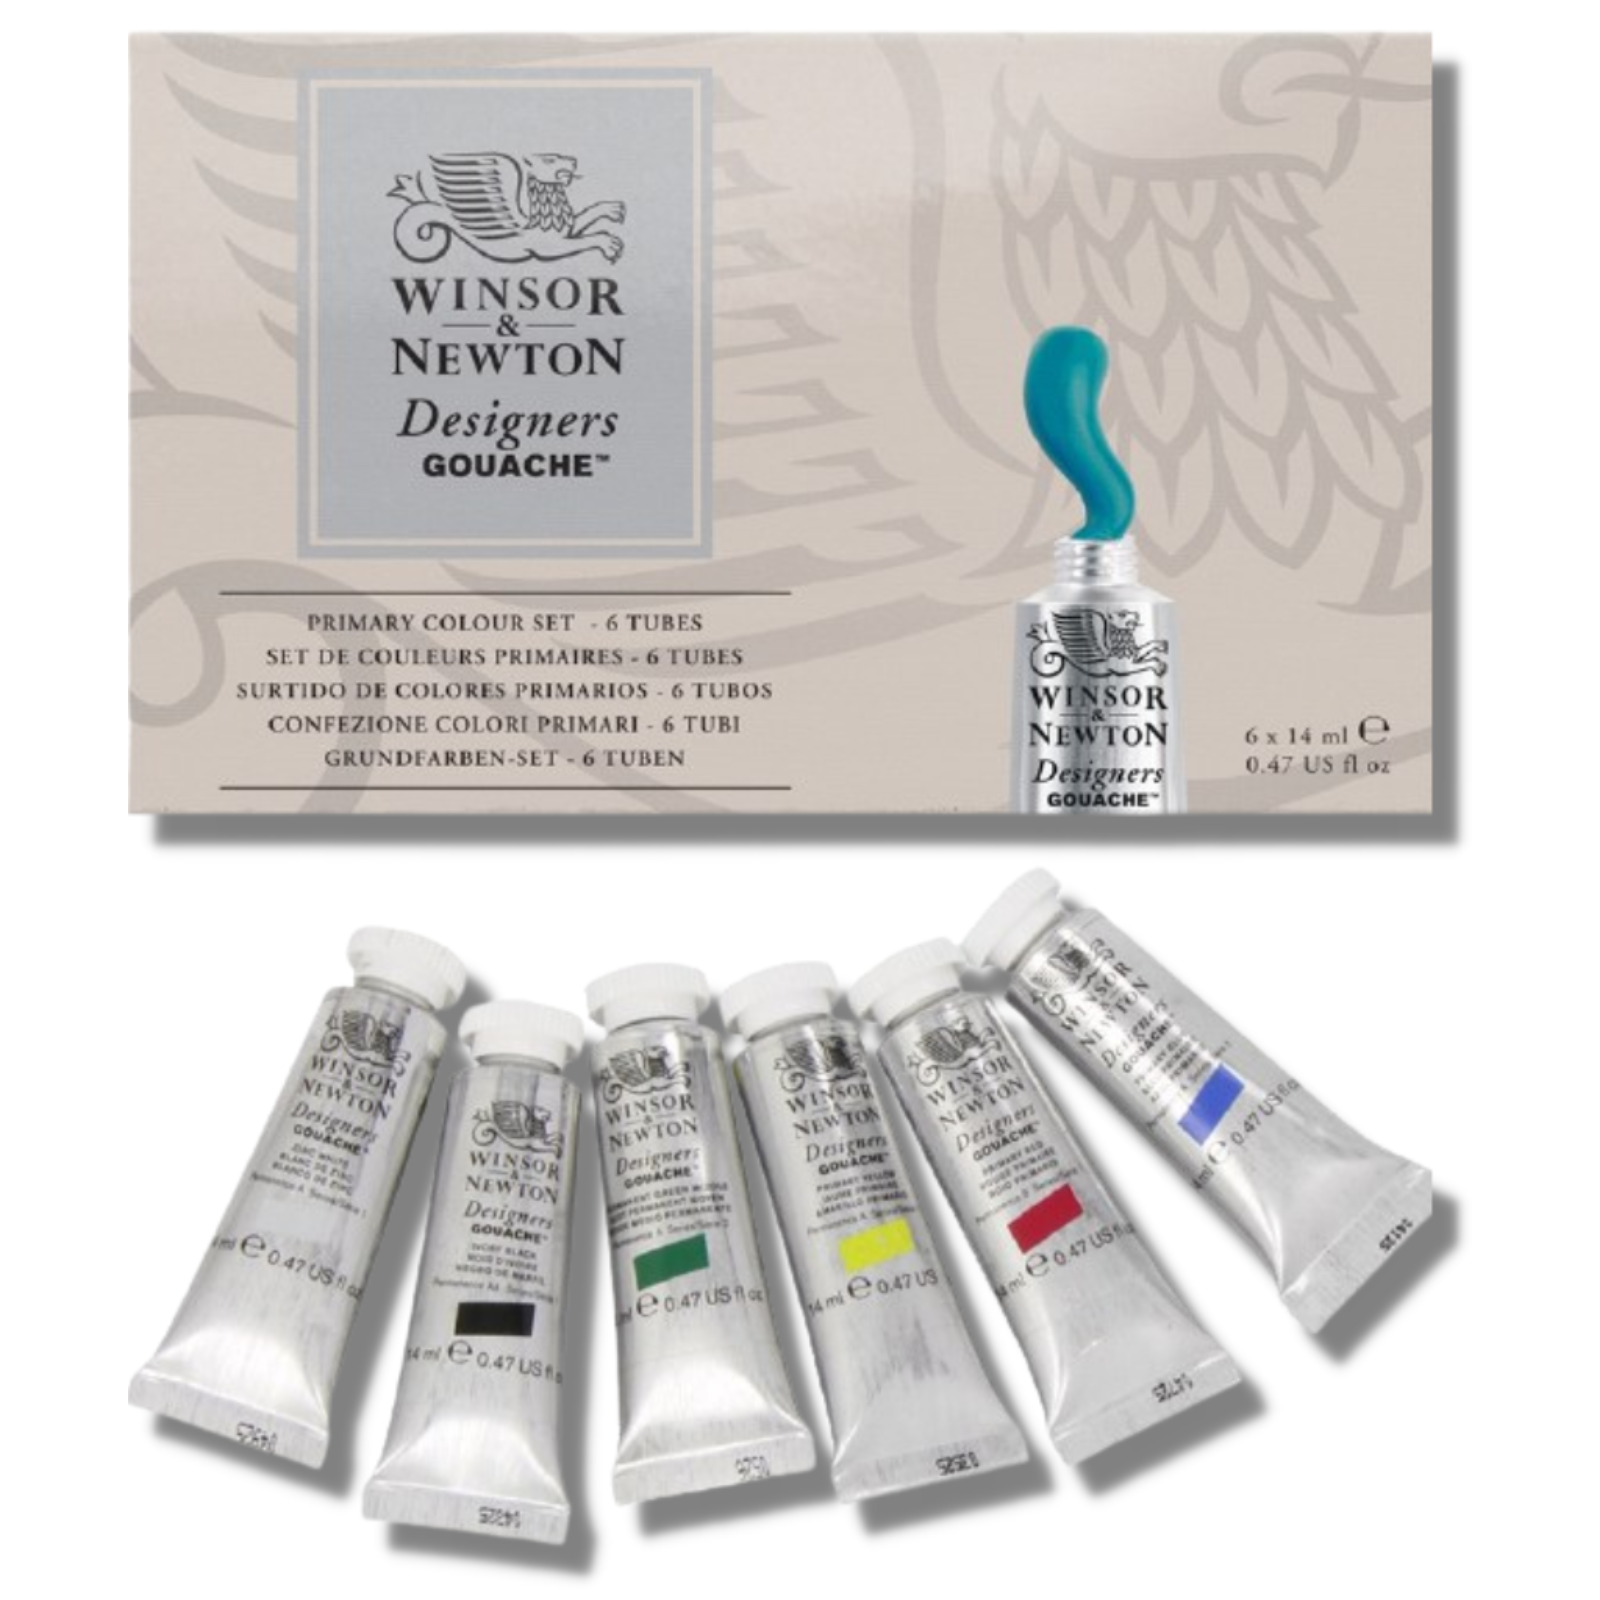 Winsor & Newton 6 Designers Gouache Primary Colours, 14ml Tube, Painting - widely used in fine art as an opaque watercolour